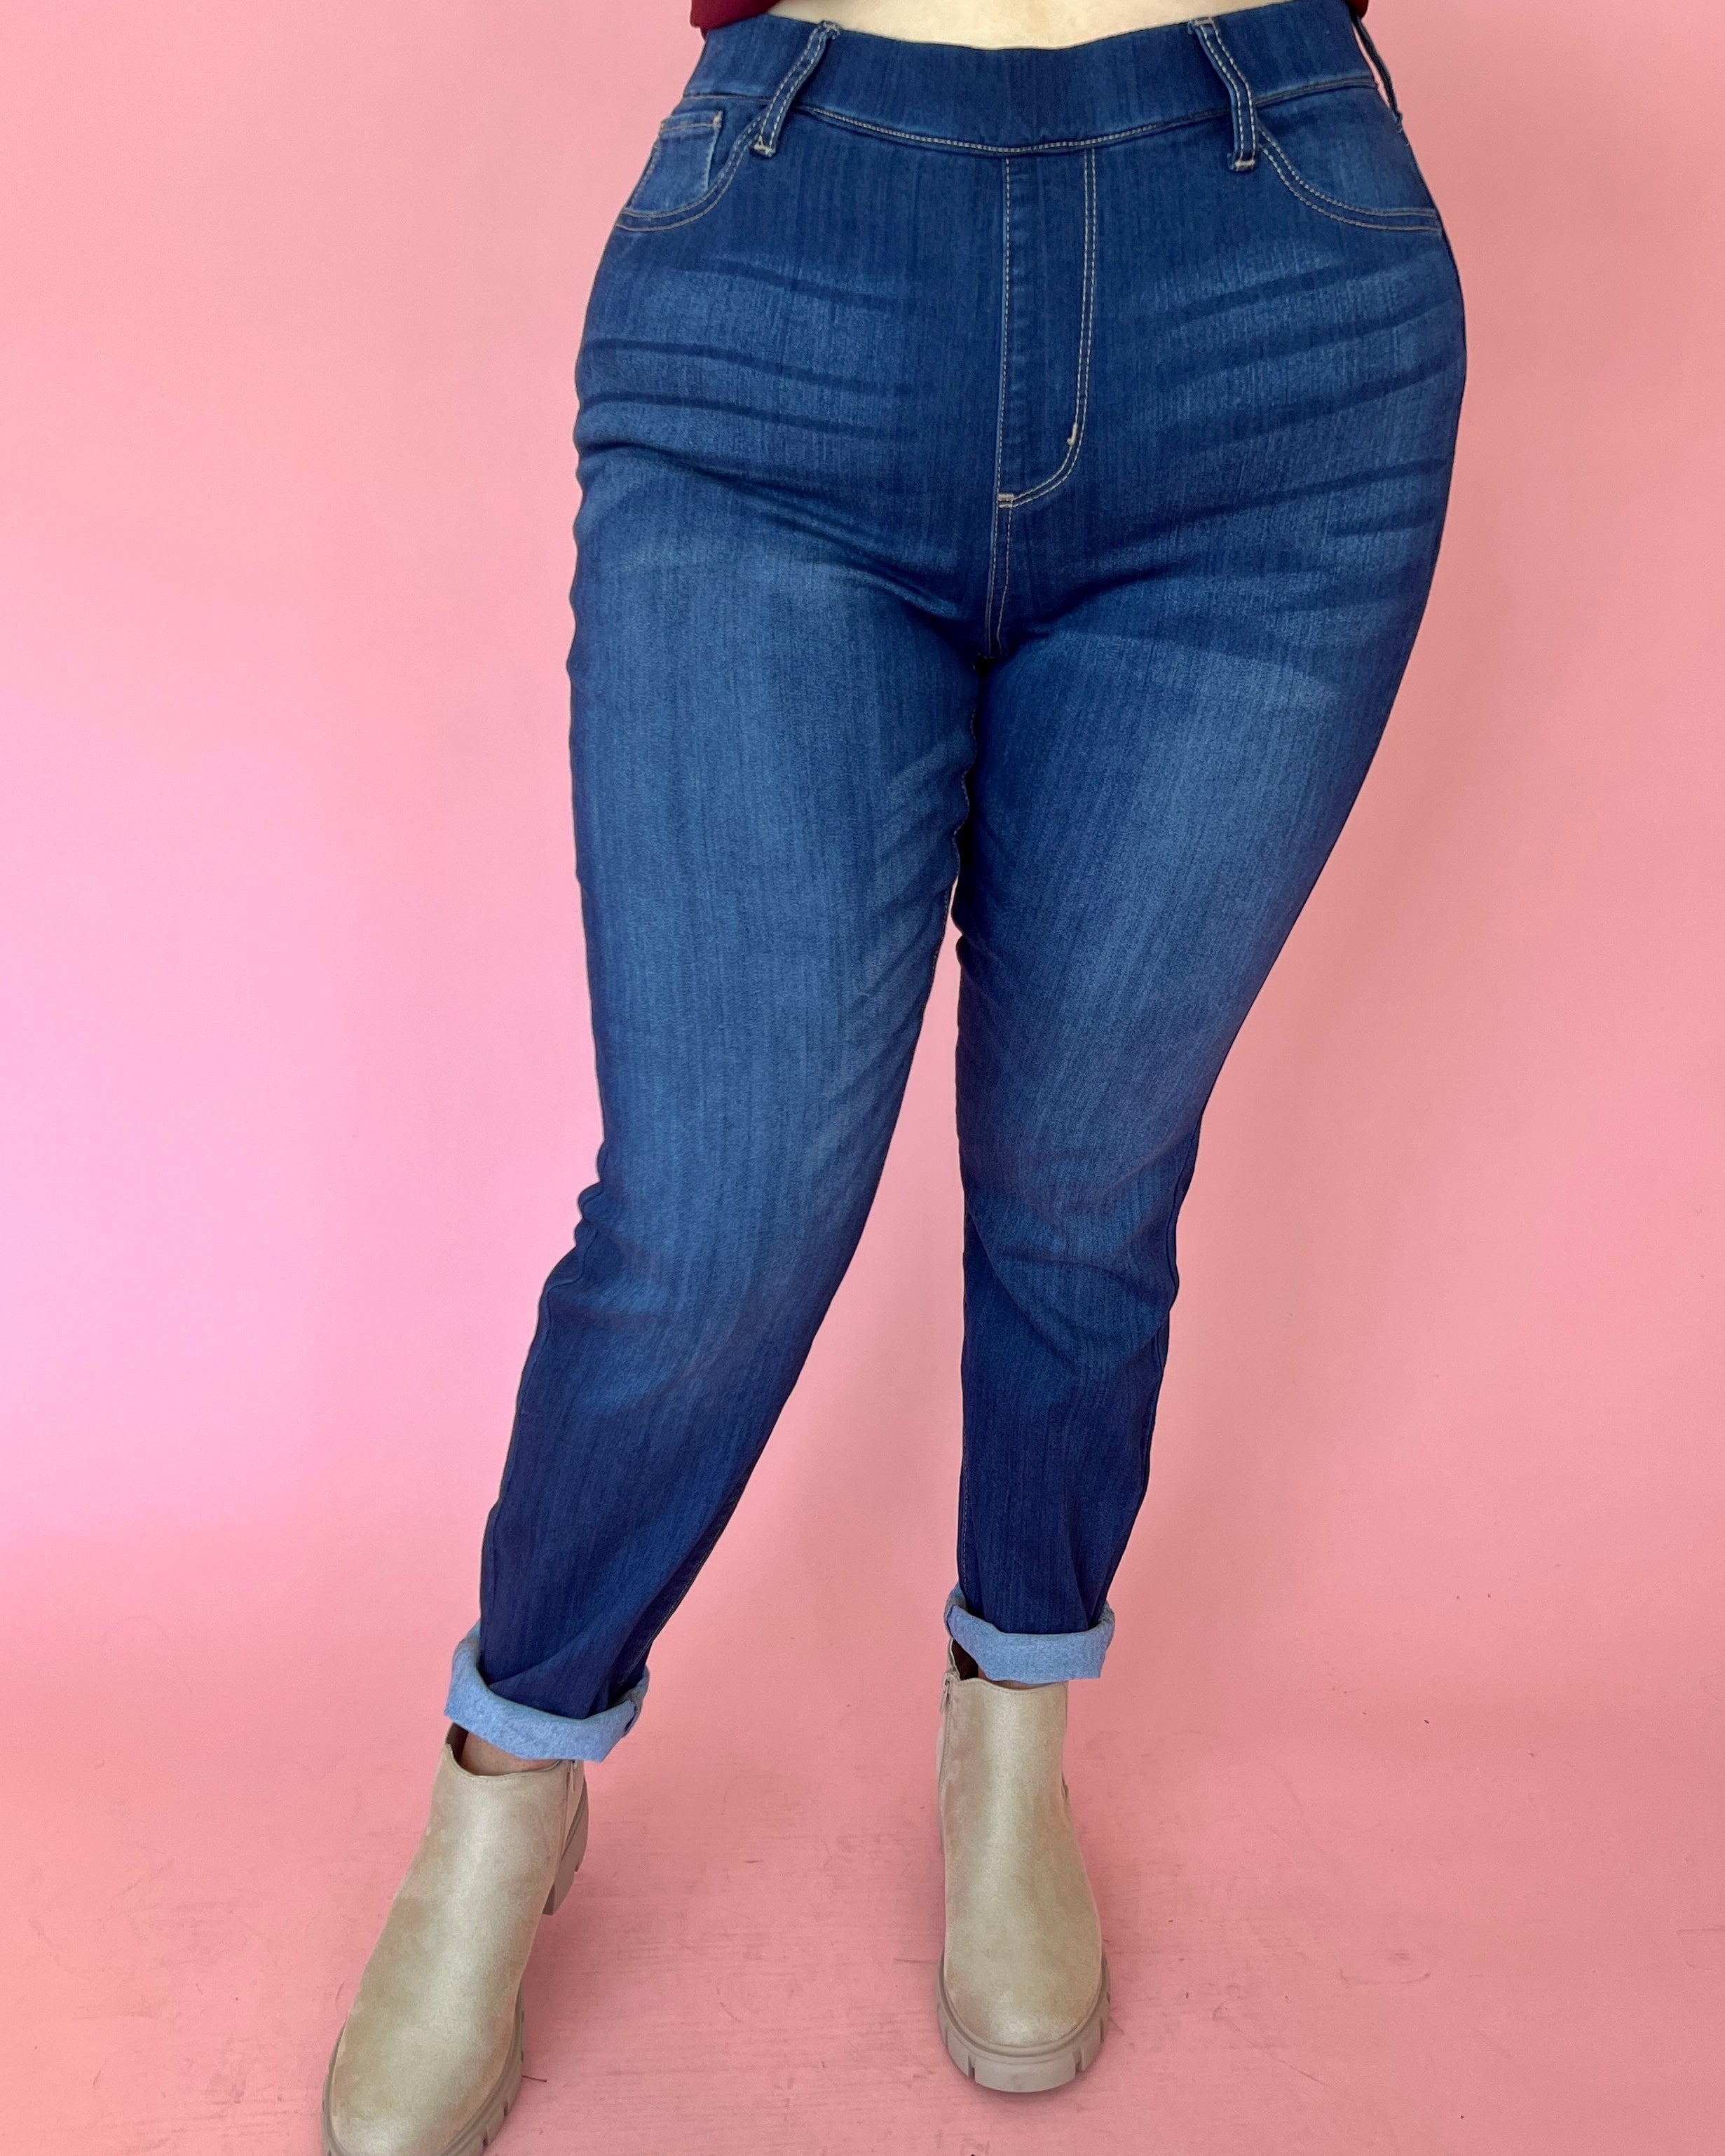 Get the jeans - Wheretoget  Women denim jeans, Comfy casual